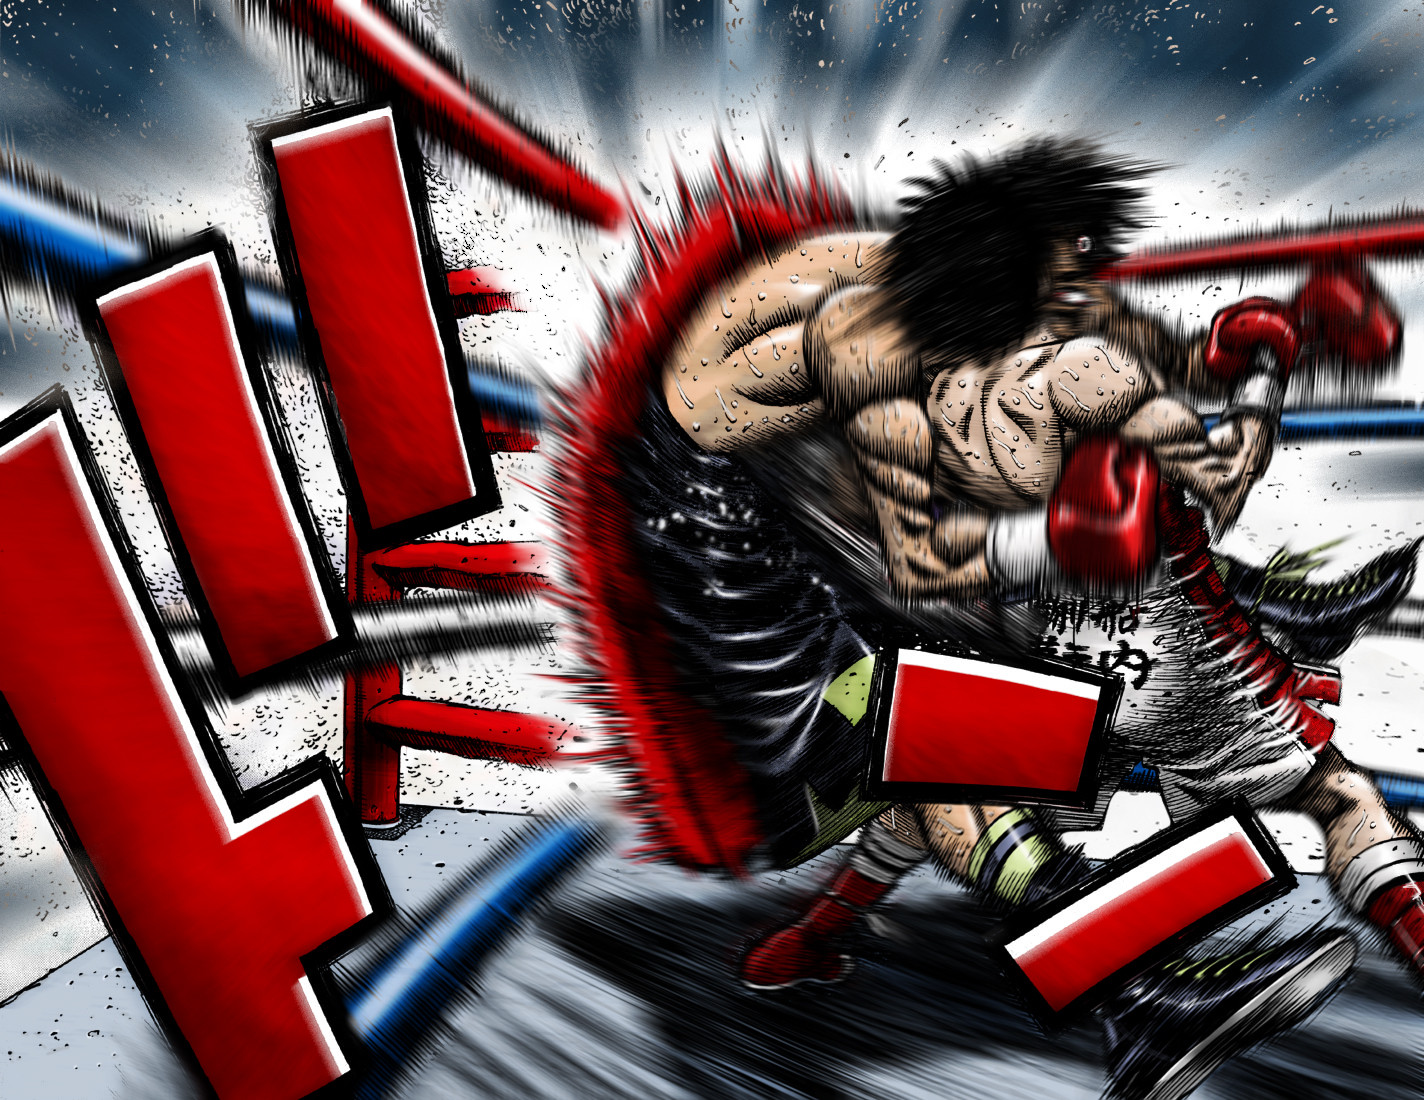 Knock out anime - Watch the new episode of Knock out anime In  http://www.animeseason.com/hajime-no-ippo-rising/ | Facebook